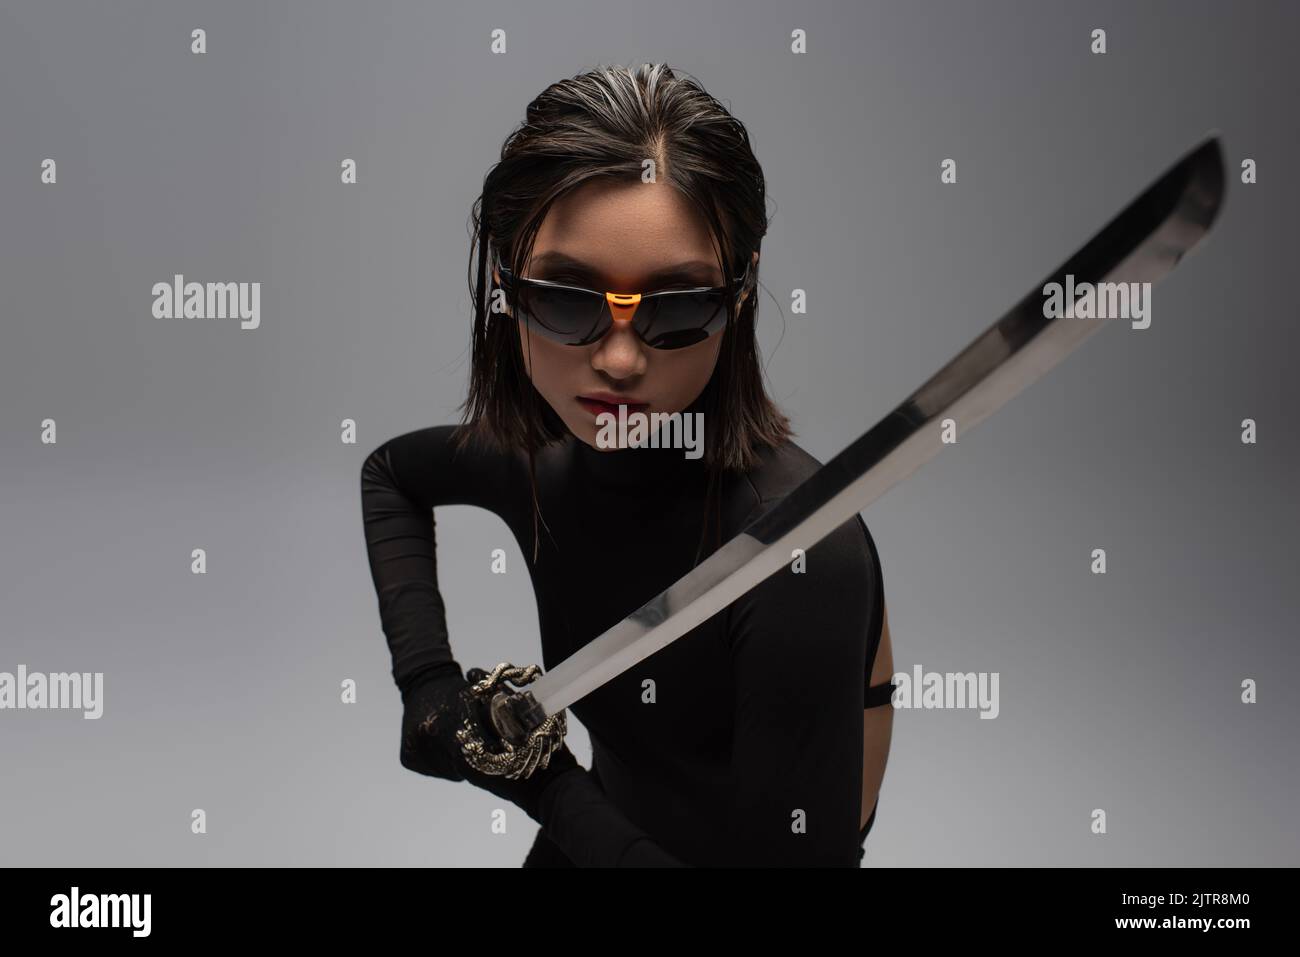 dangerous asian woman in sunglasses and black outfit holding katana isolated on grey,stock image Stock Photo